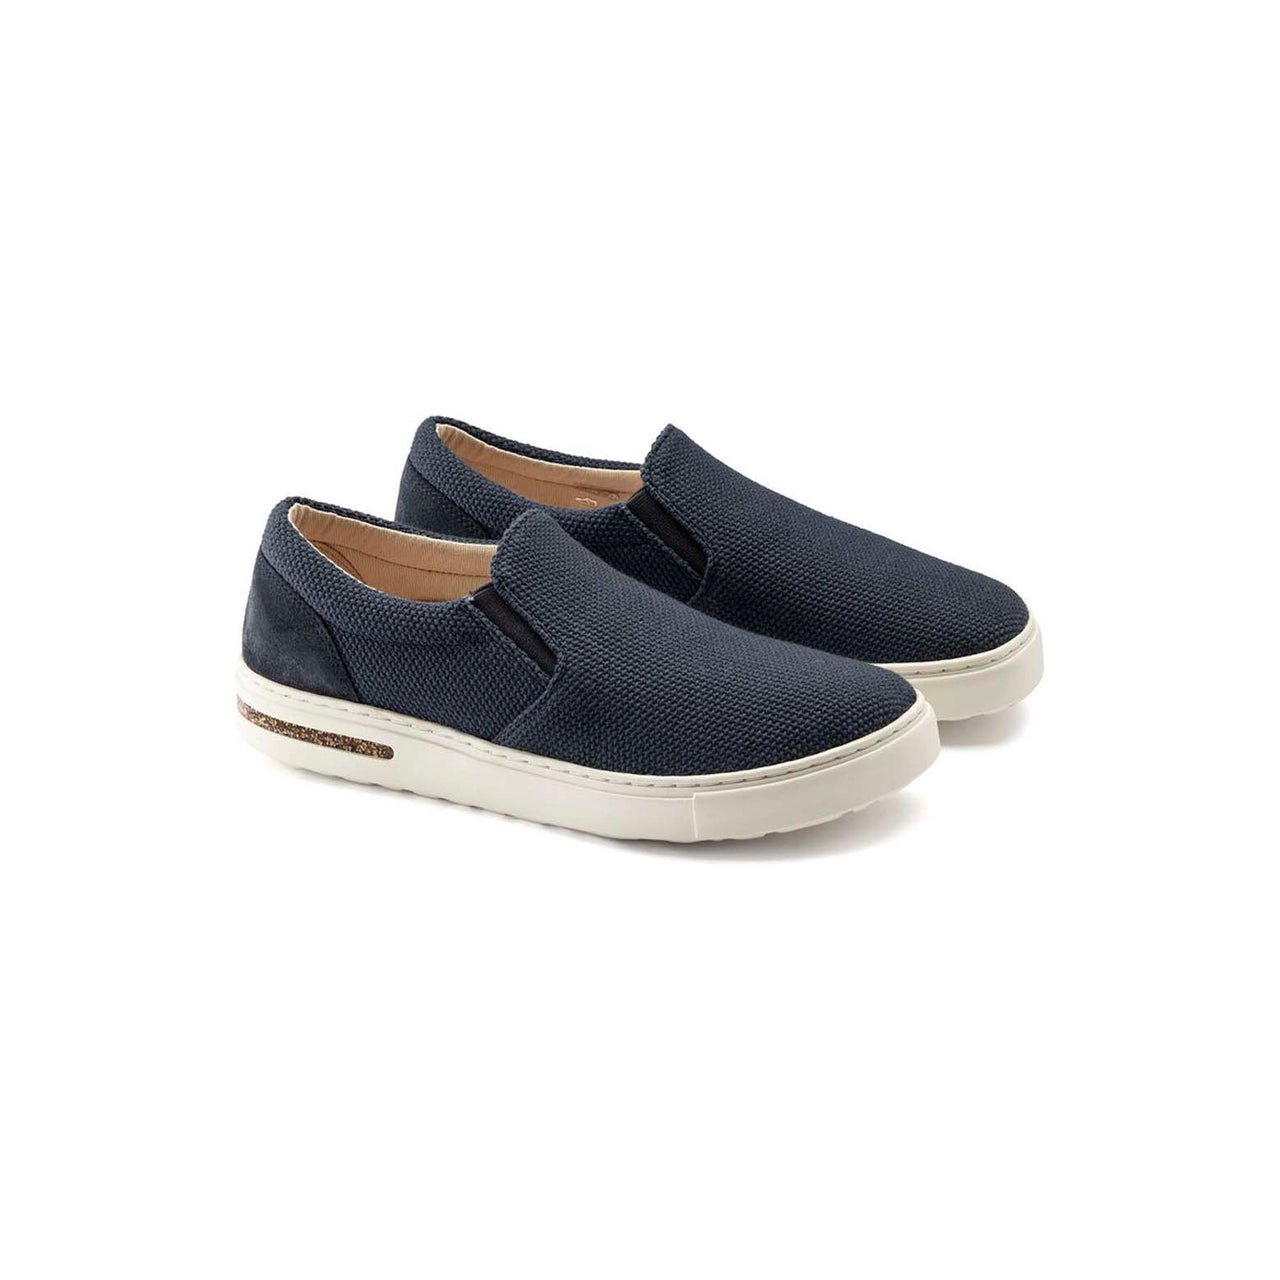 Versatile Oswego Shoes Midnight in midnight blue color for any outfit